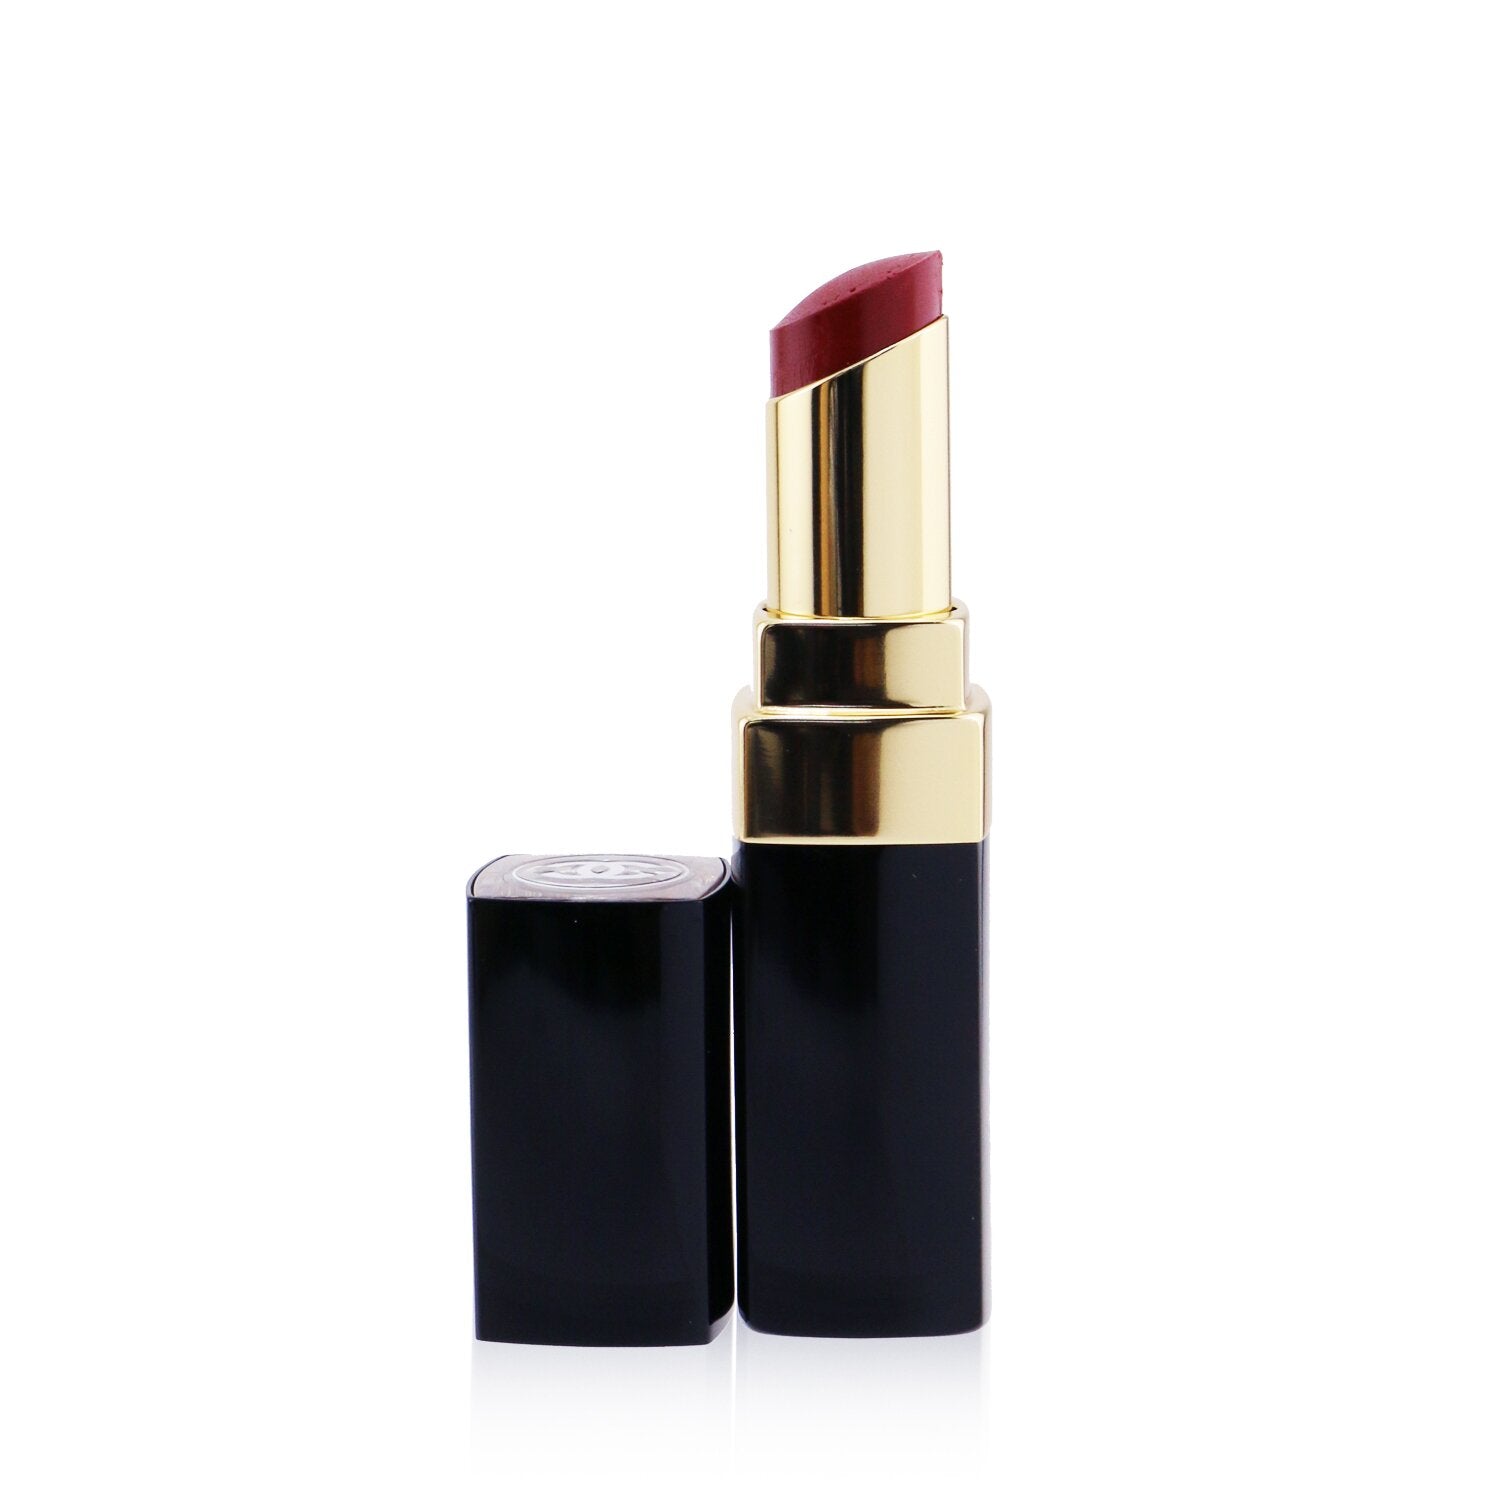 Chanel Rouge Coco Flash Hydrating Vibrant Shine Lip Colour - # 60 Beat 3g